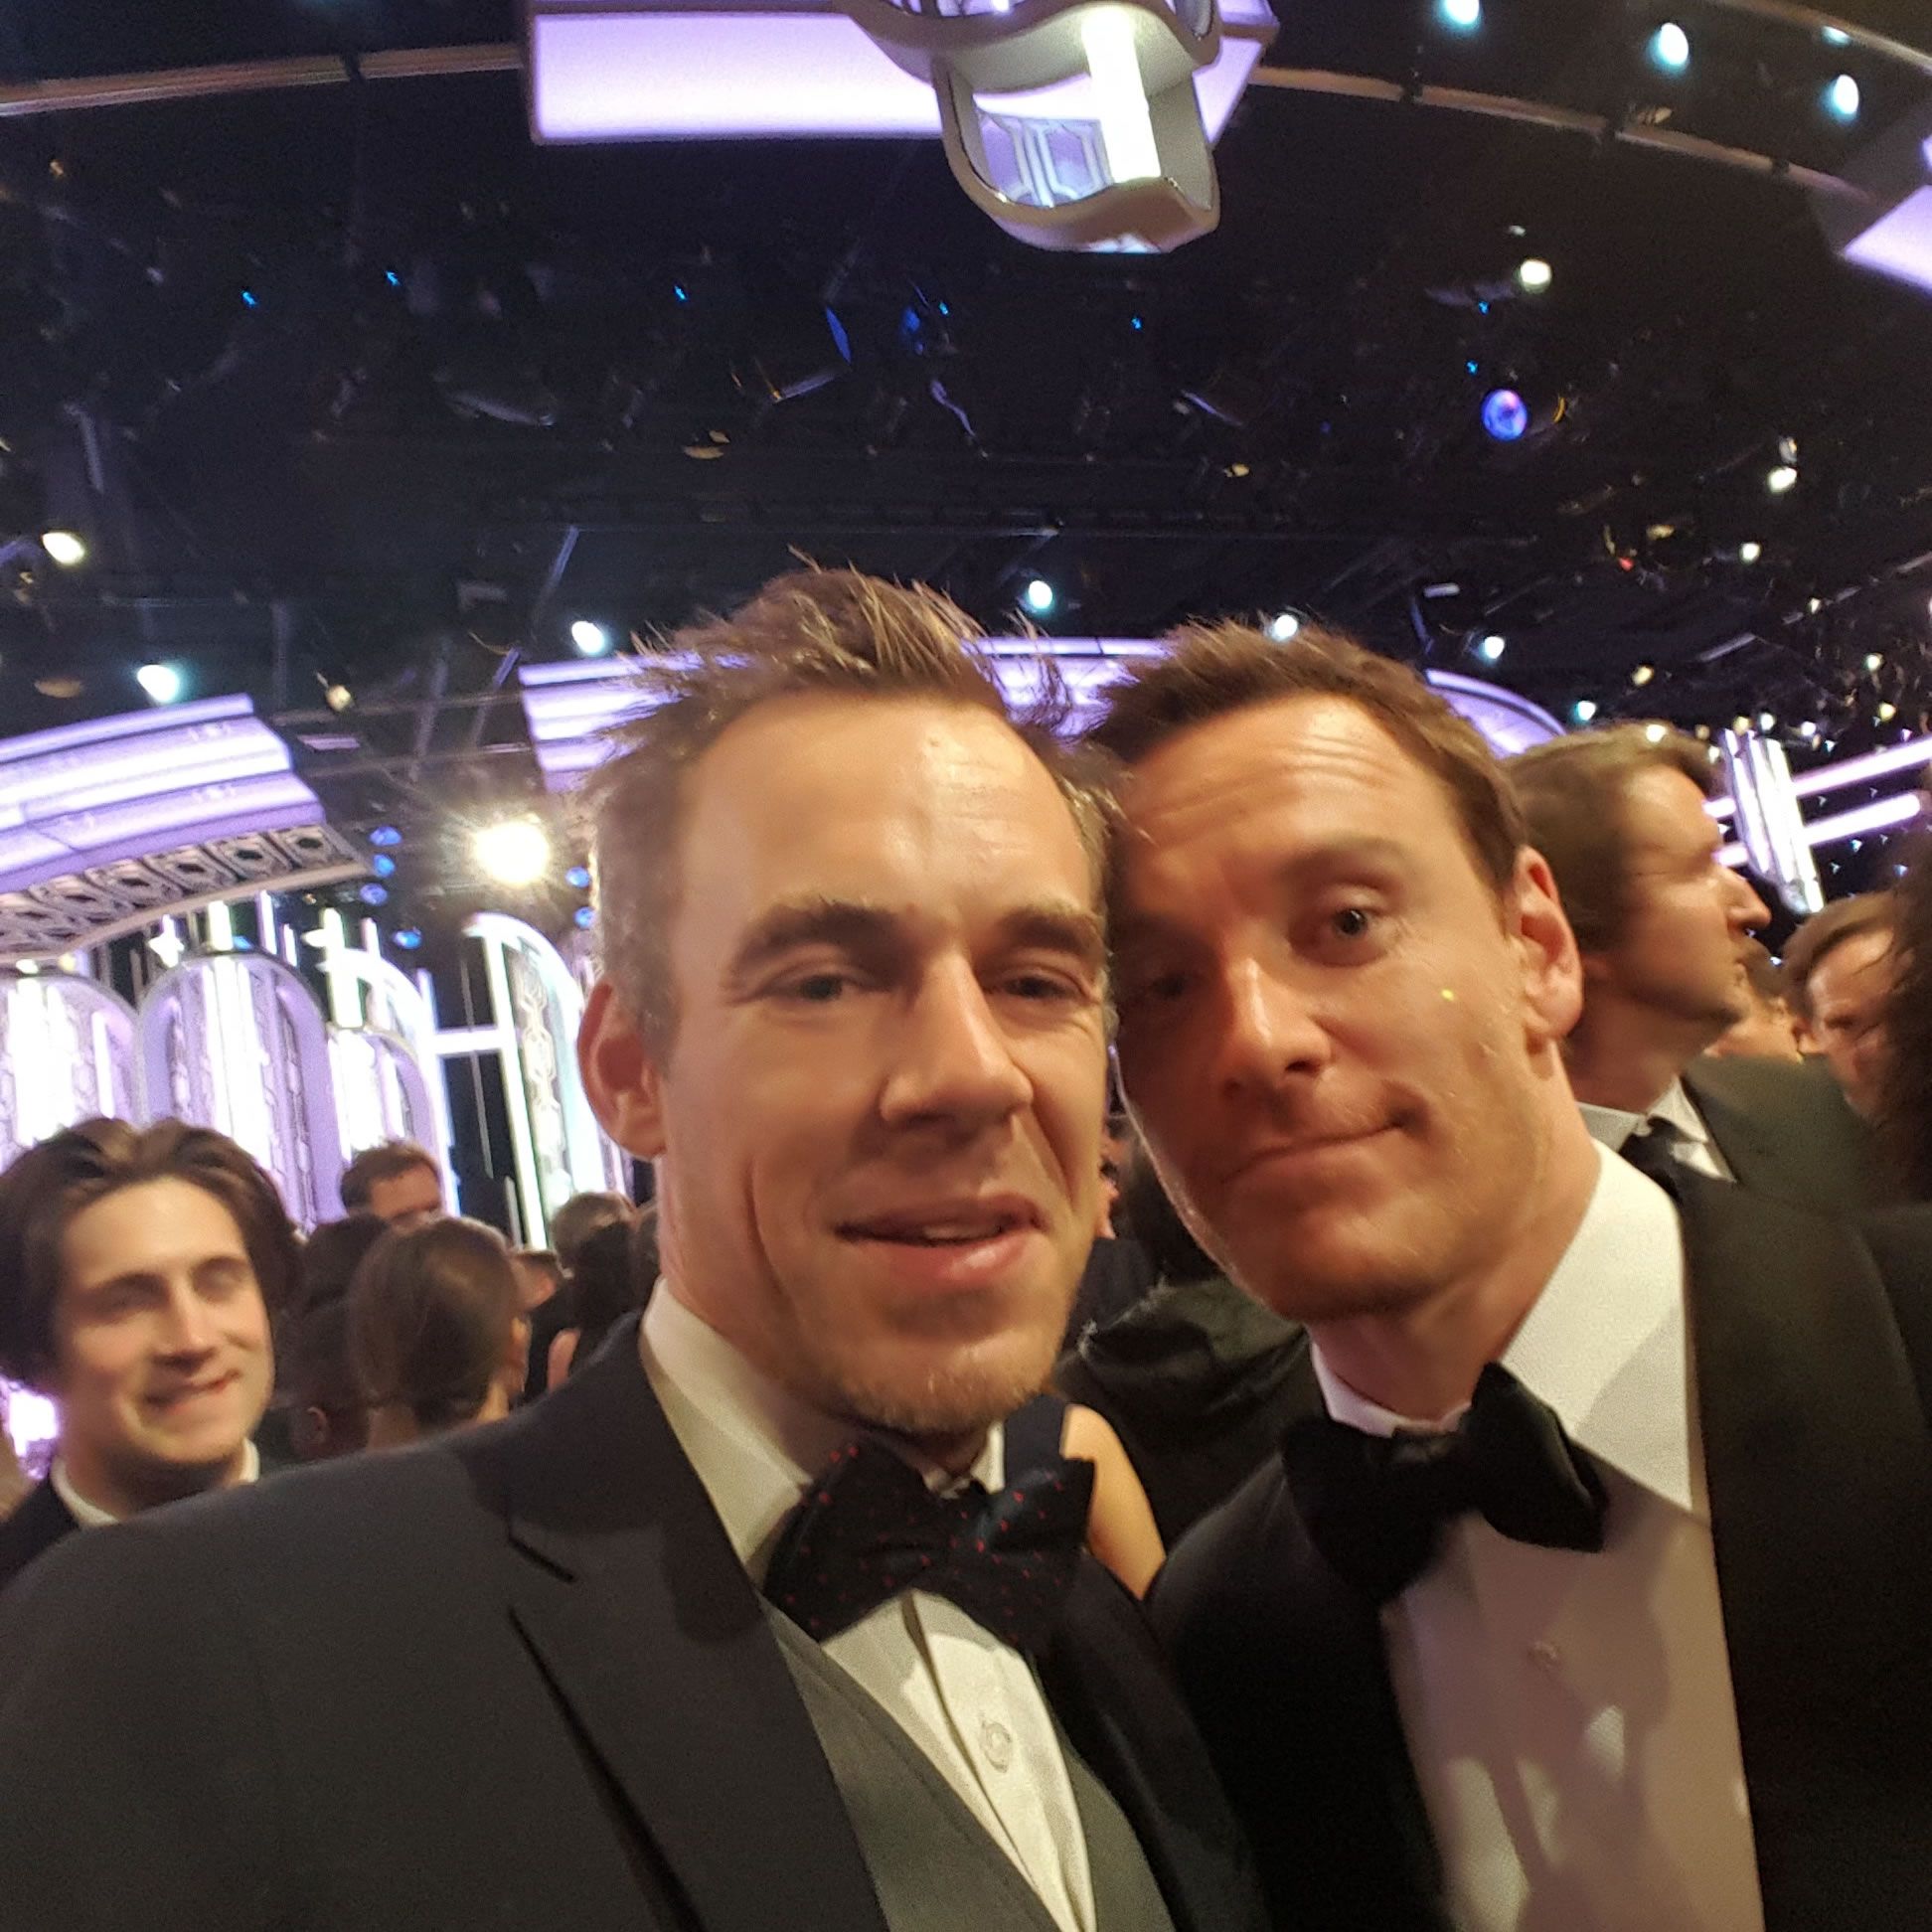 PLANET X Film Director and Michael Fassbender at The Golden Globes 2016.